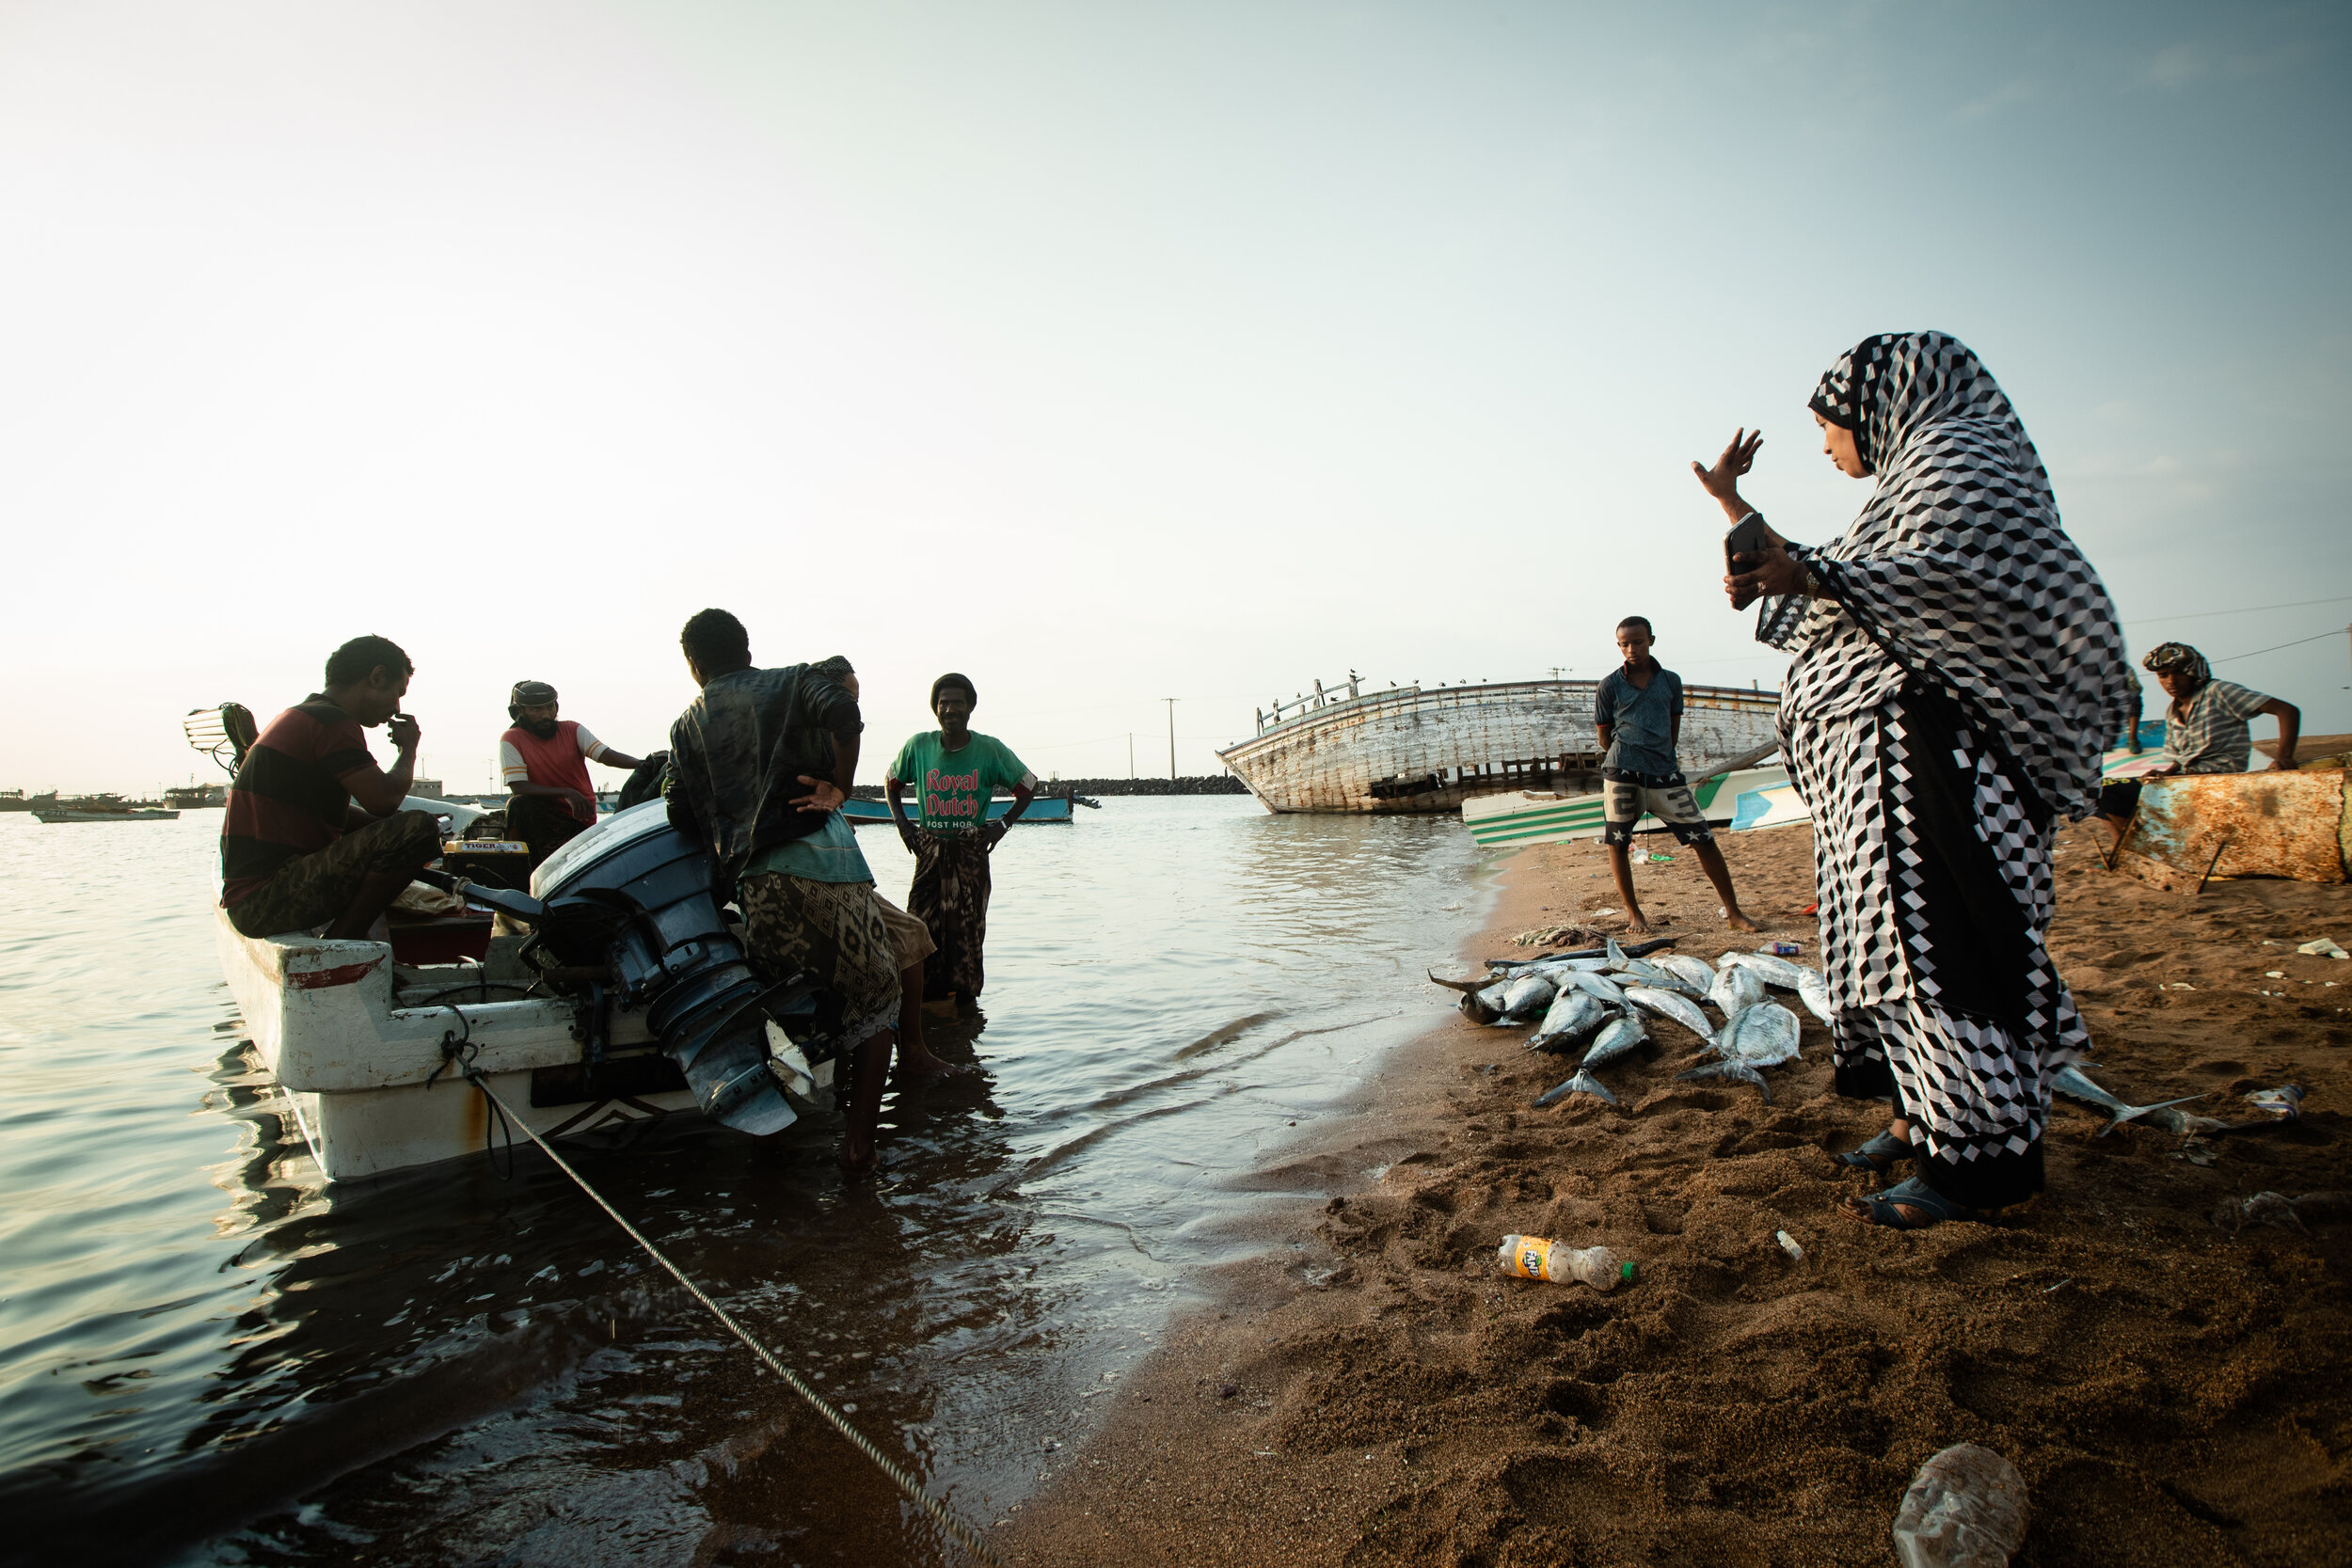  in Obock, I met Aisha, the grand daughter of the grand Darwish who, back in the 80s, was the first fisherman to bring fishing to Obock. everyday Aisha waits on the shore for the fishermen to return with their catch. she monitors them while they weig